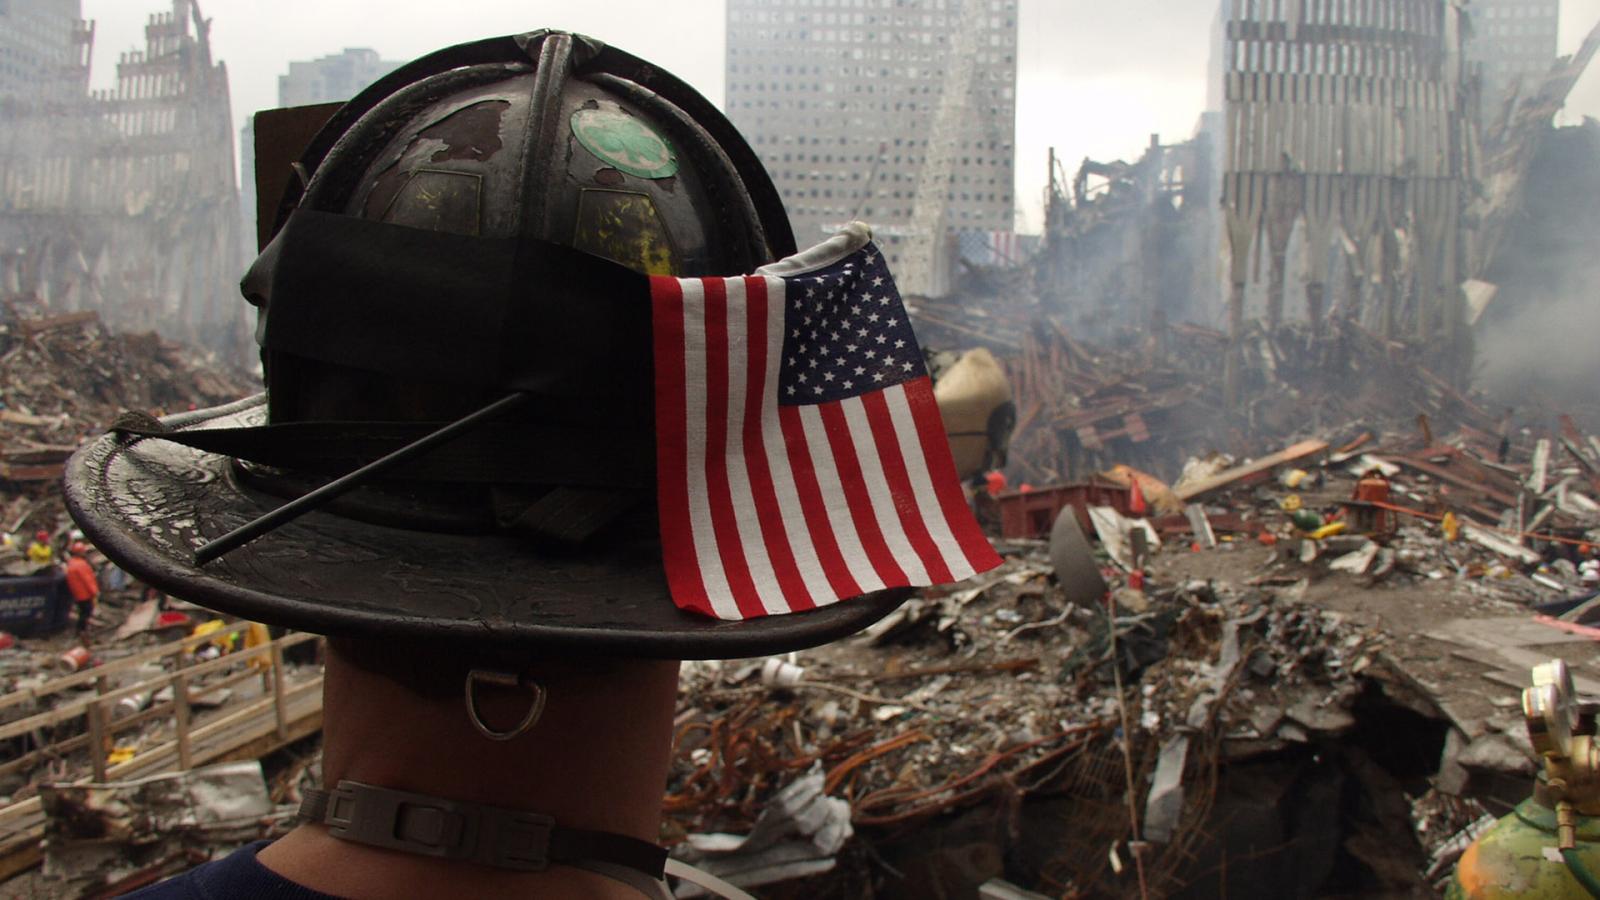 Back view of a rescue worker in a hard hat with an American flag tucked in its rim, overlooking rubble at Ground Zero